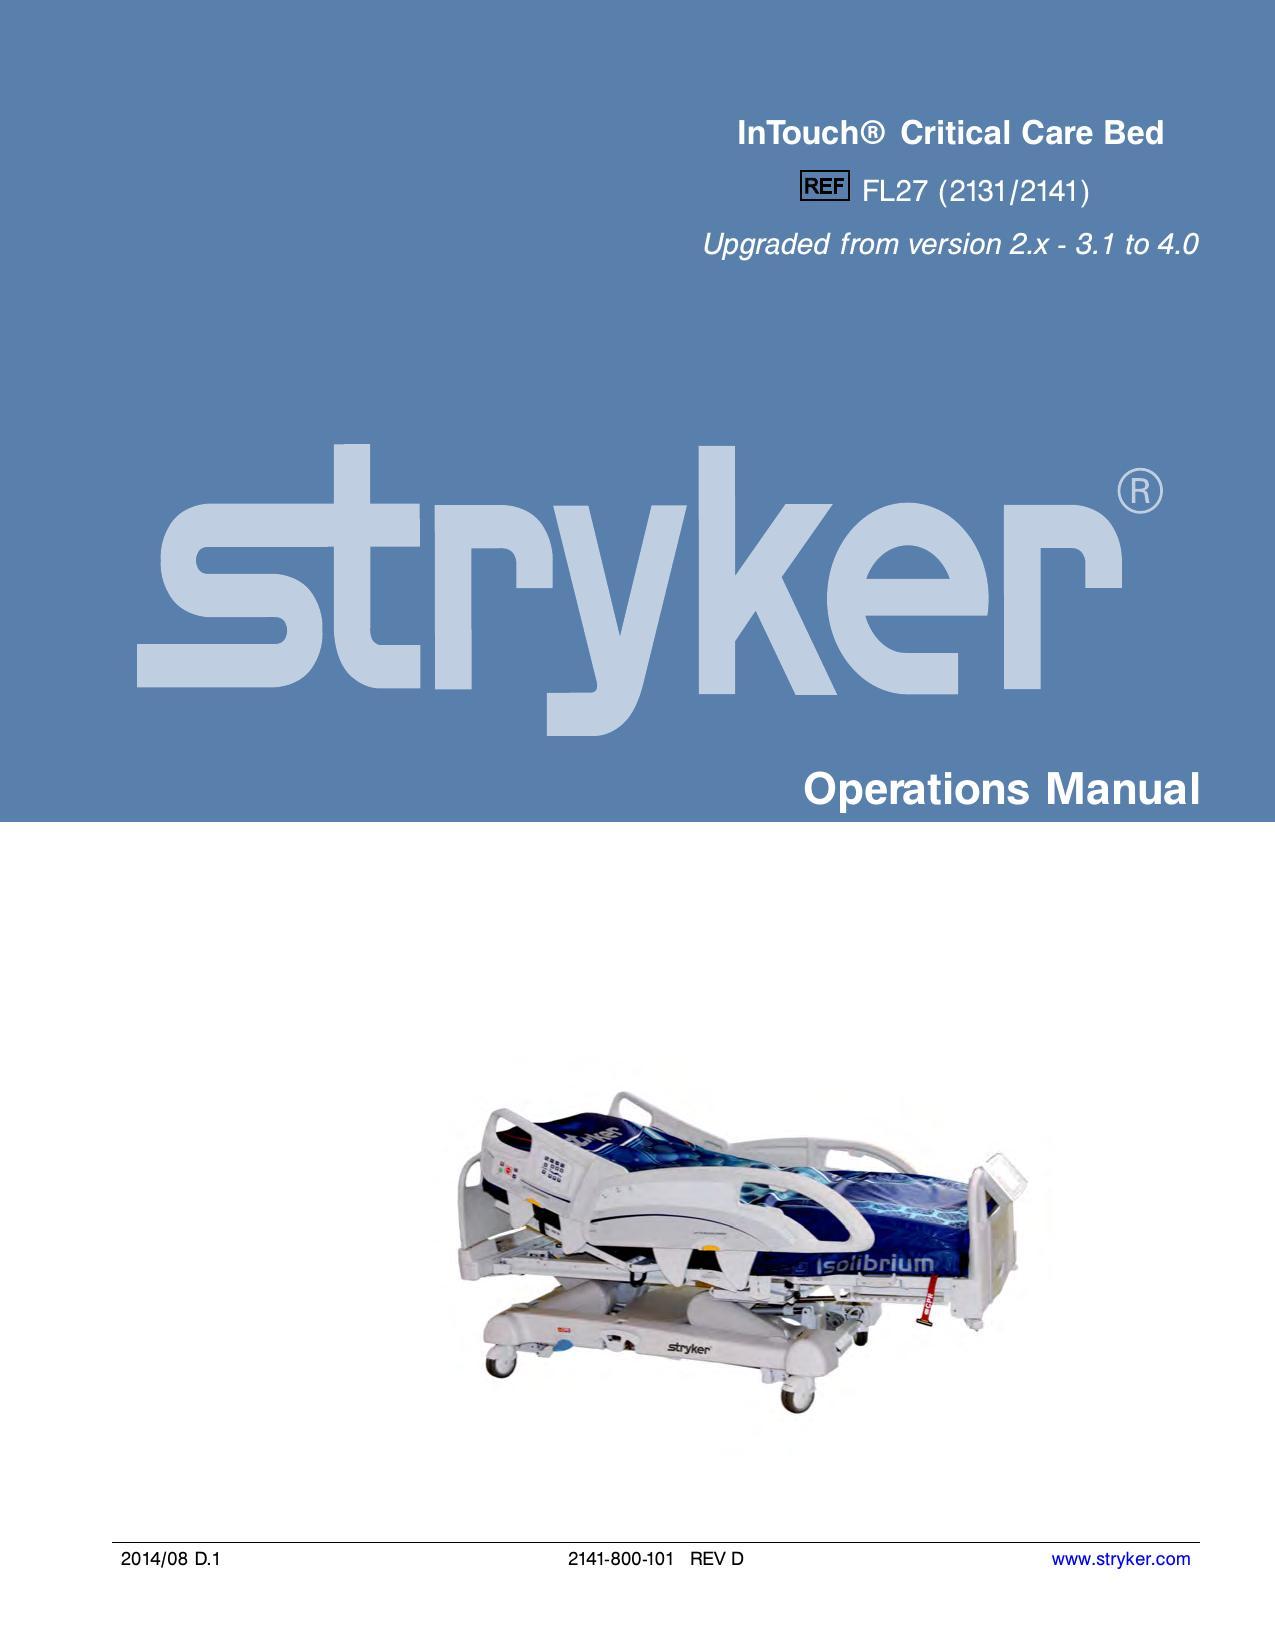 stryker-intouch-critical-care-bed-fl27-21312141-operations-manual.pdf